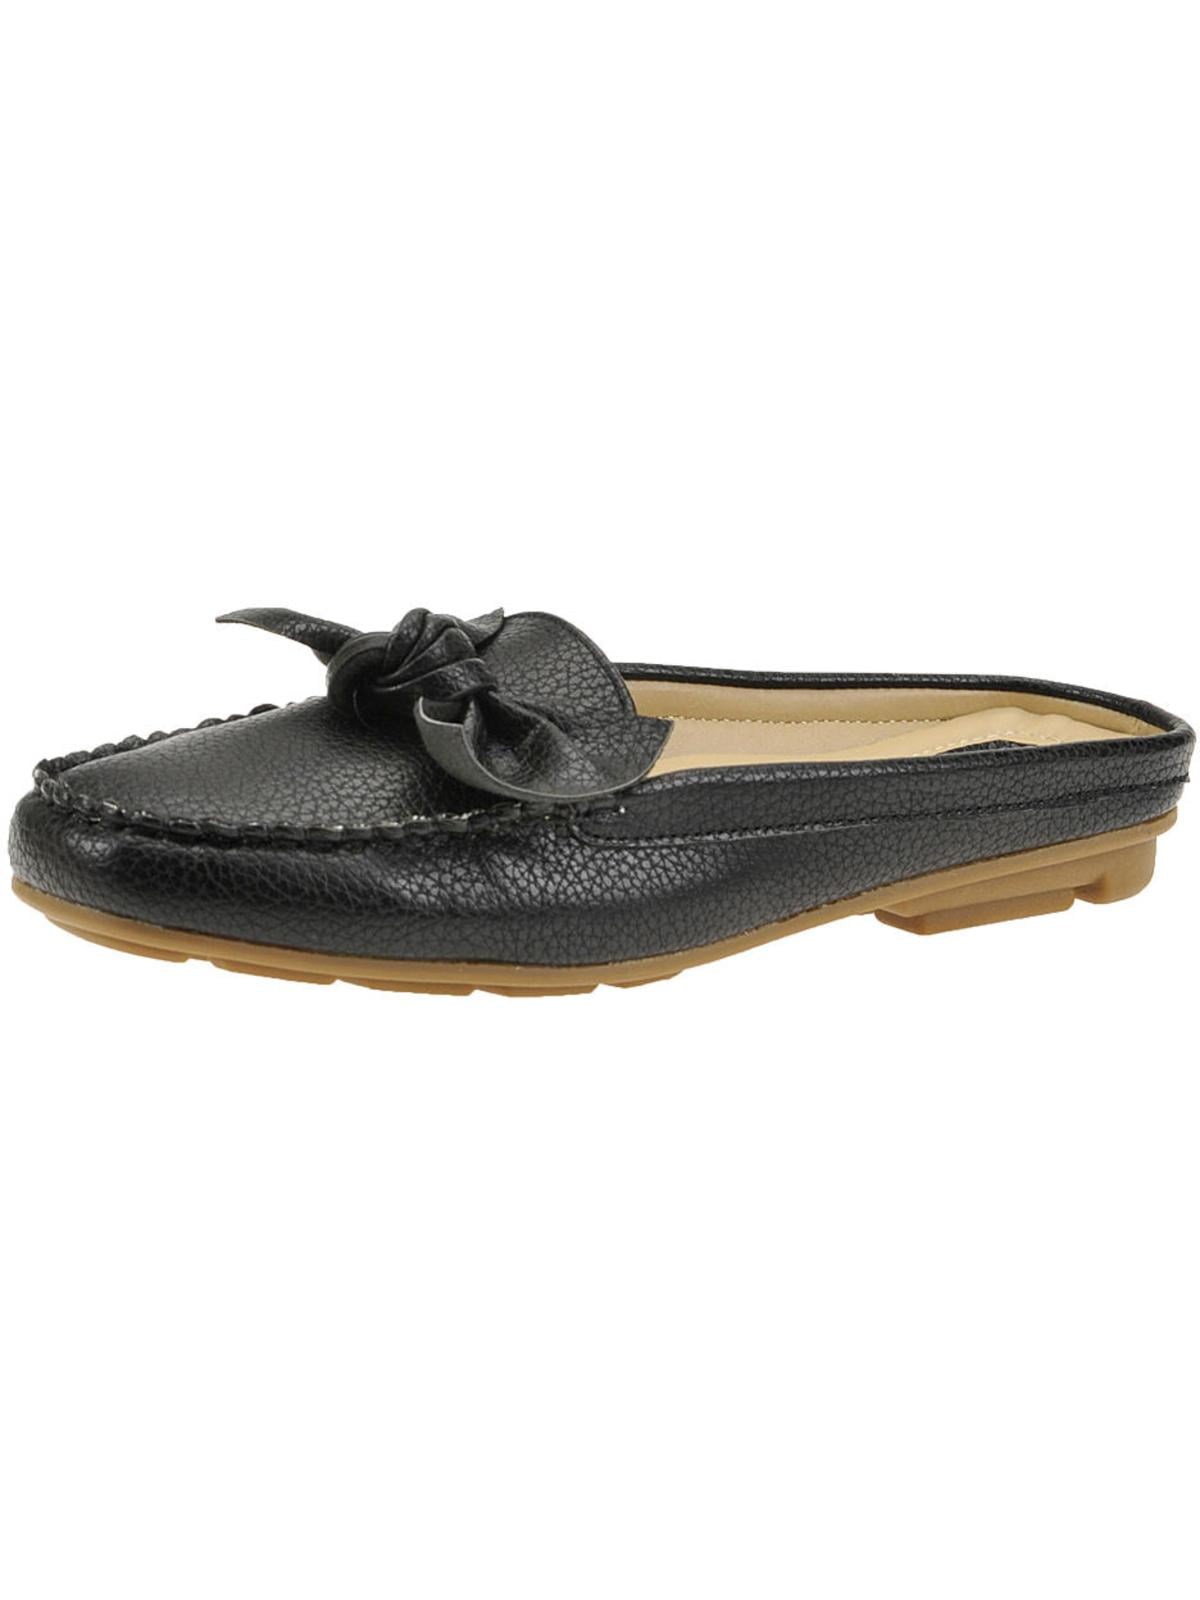 Charter Club Womens Alettee Faux Leather Slip On Loafers Shoes BHFO 7299